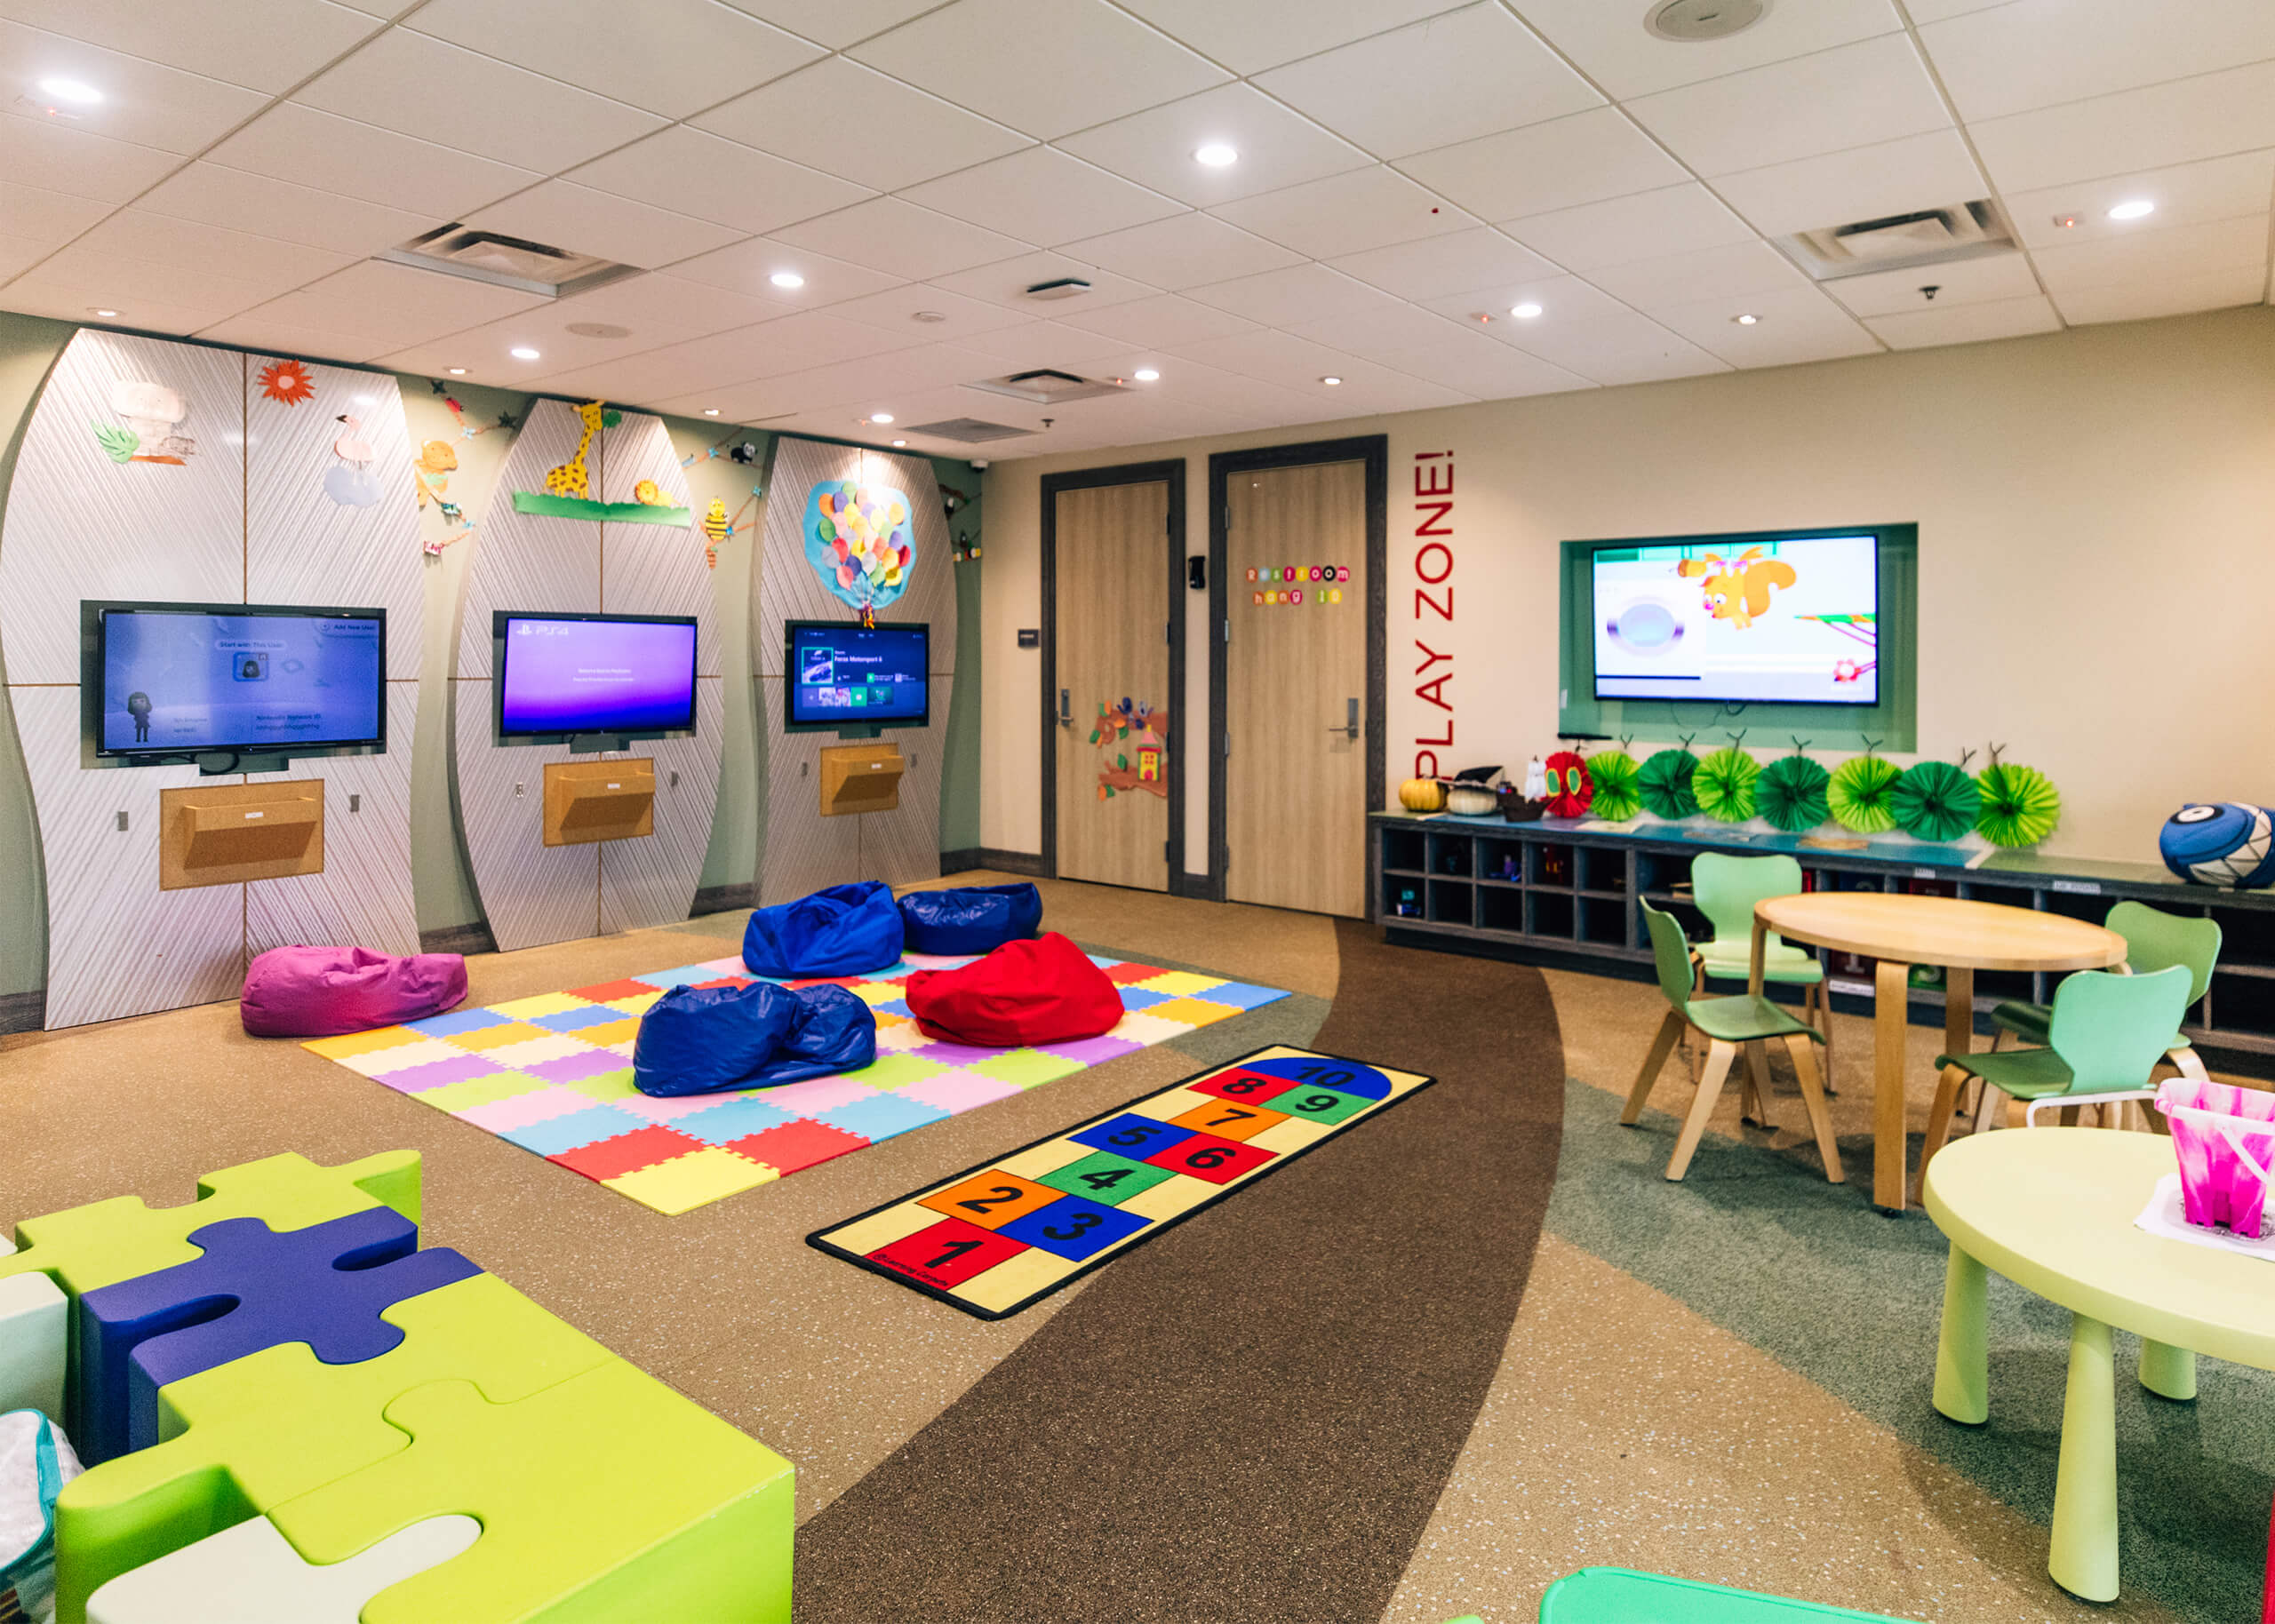 The Hang Ten Hideaway play room at Encore Resort, featuring bean bag chairs, video games, and toys.